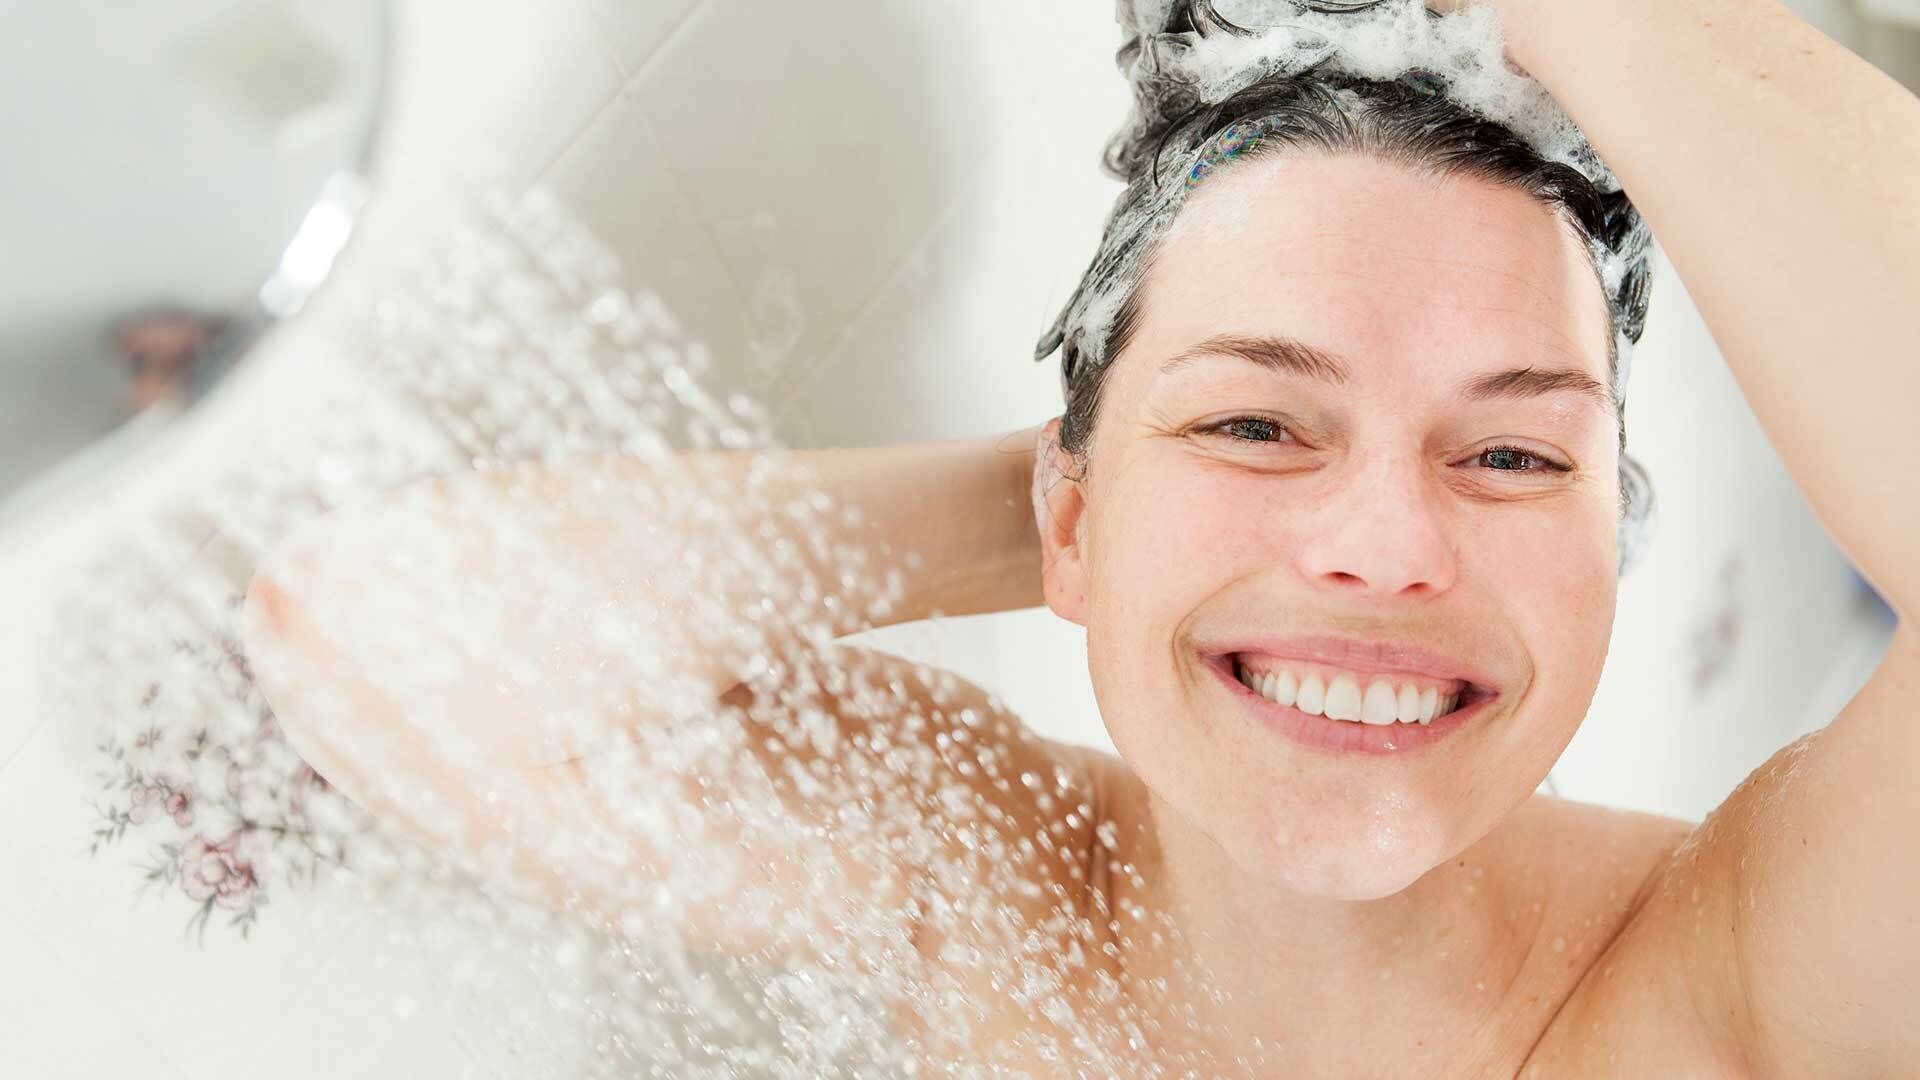 Skin taut after showering: These are the typical beauty mistakes